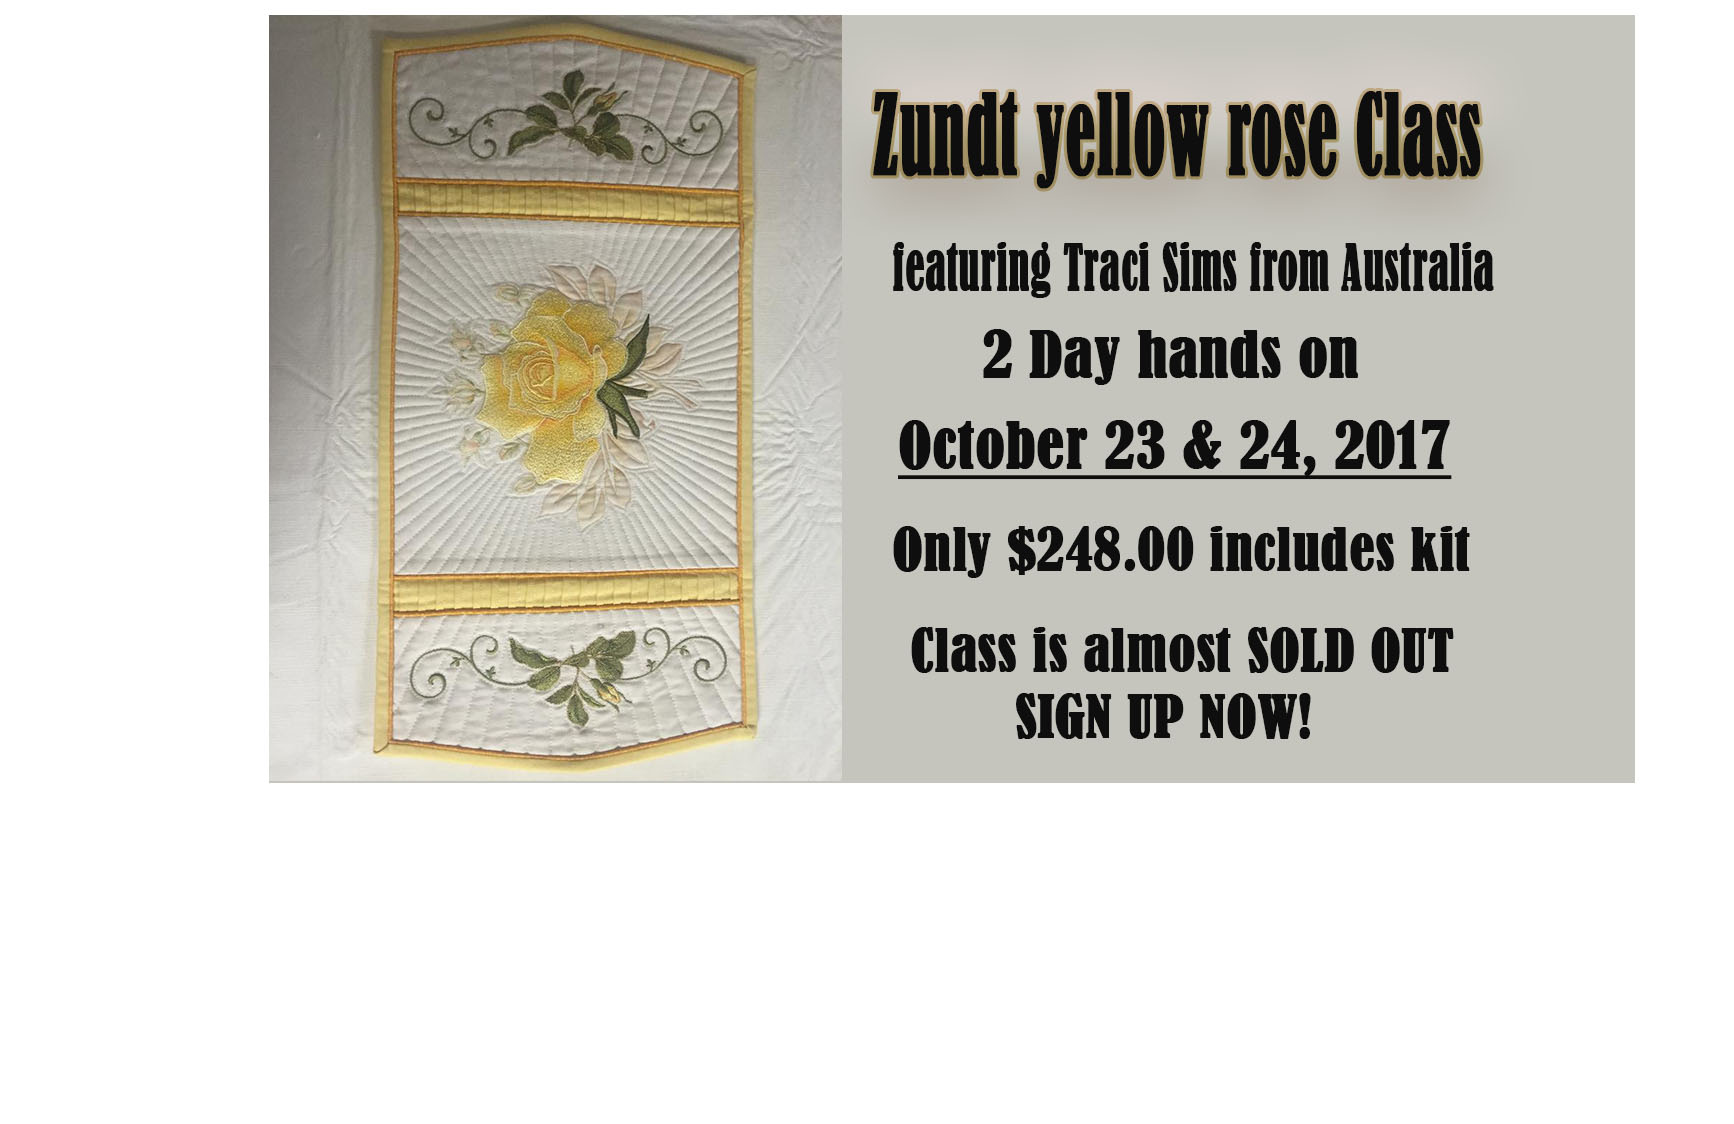 Yellow rose ad corrected